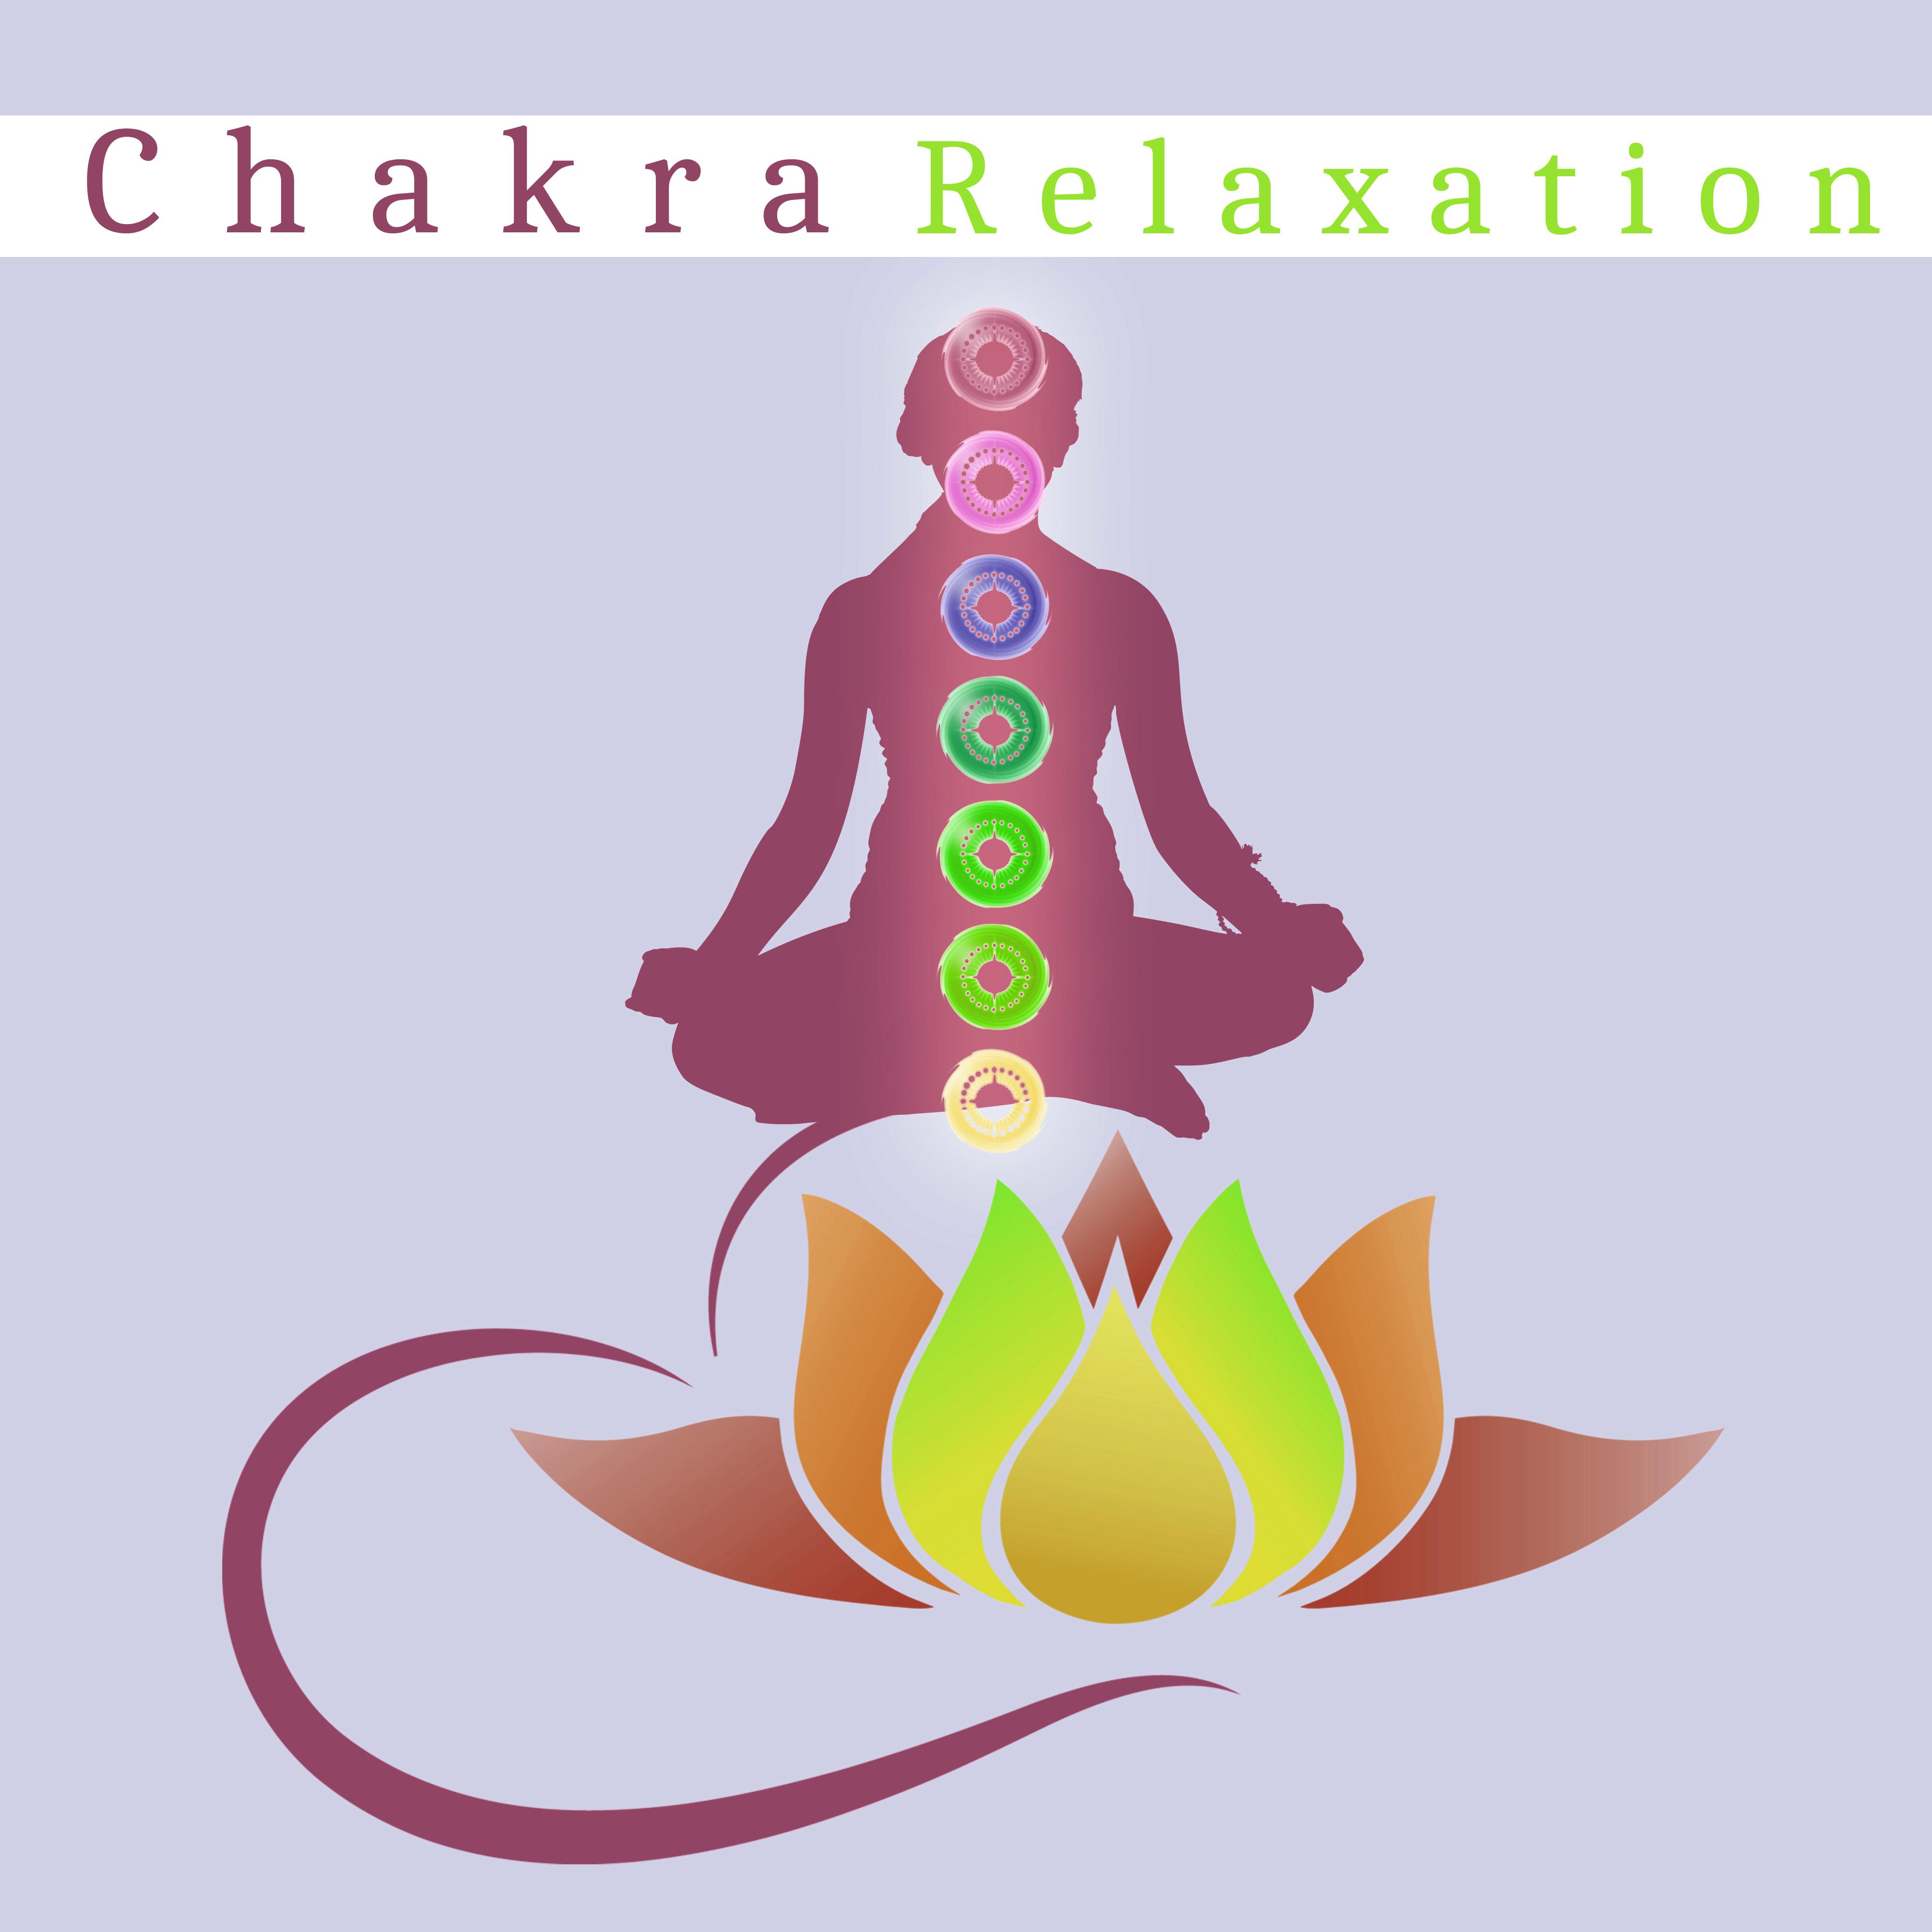 Chakra Relaxation – Yoga Music, Relief, Calm Down, Meditation Music, Peaceful Sounds, Pure Mind, Reiki